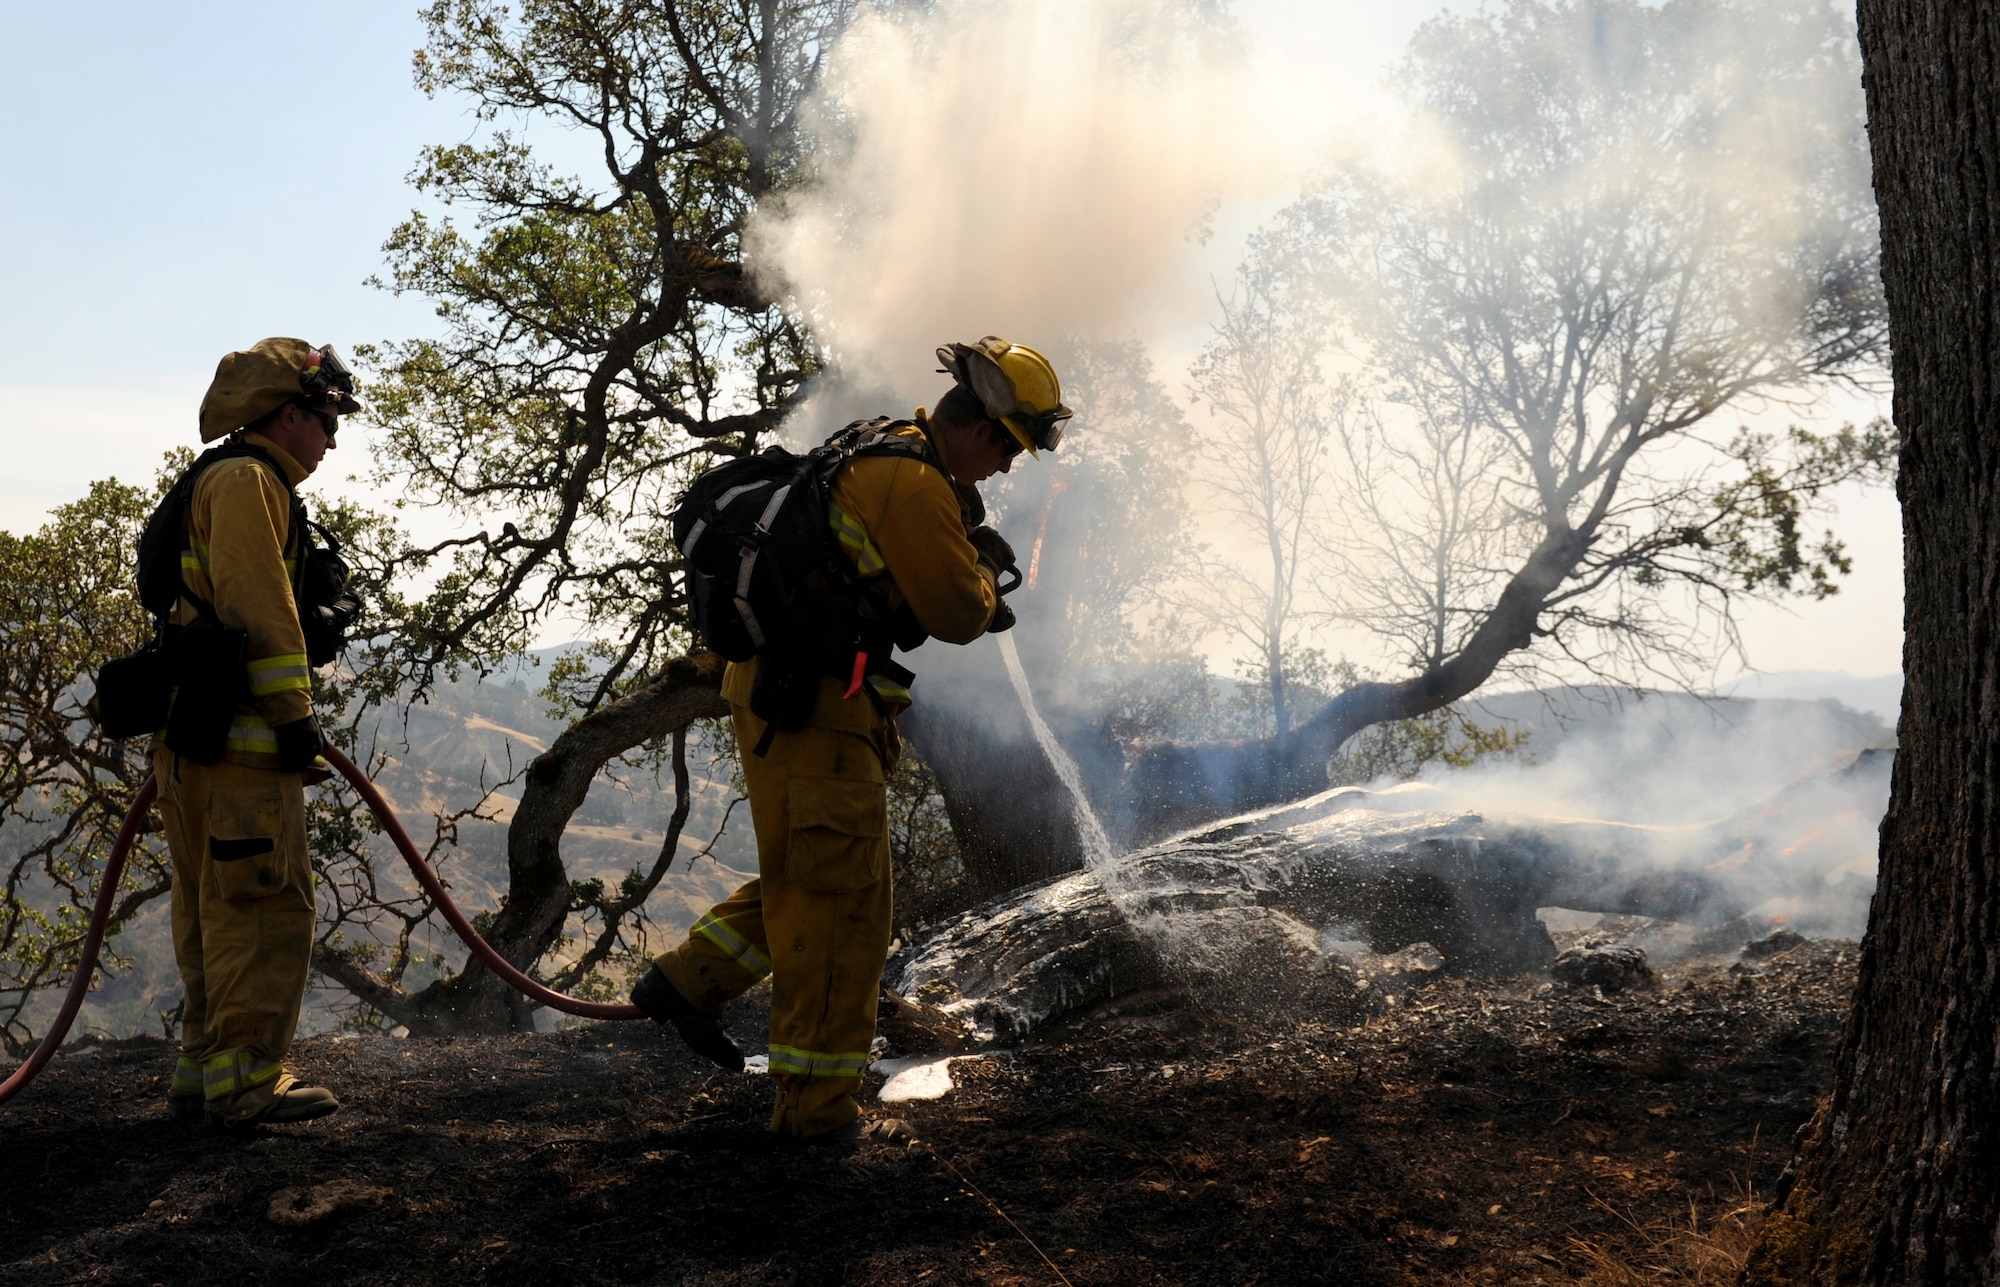 Will Hock (left), 9th Civil Engineer Squadron fire captain, assists Justin Devorss, Linda Fire Protection District engineer, with extinguishing a fire, Aug. 6, 2015, near Clearlake, California. The fire is associated with the Rocky Wildfire that has consumed nearly 70,000 acres in Northern California. (U.S. Air Force Photo by Airman Preston L. Cherry)